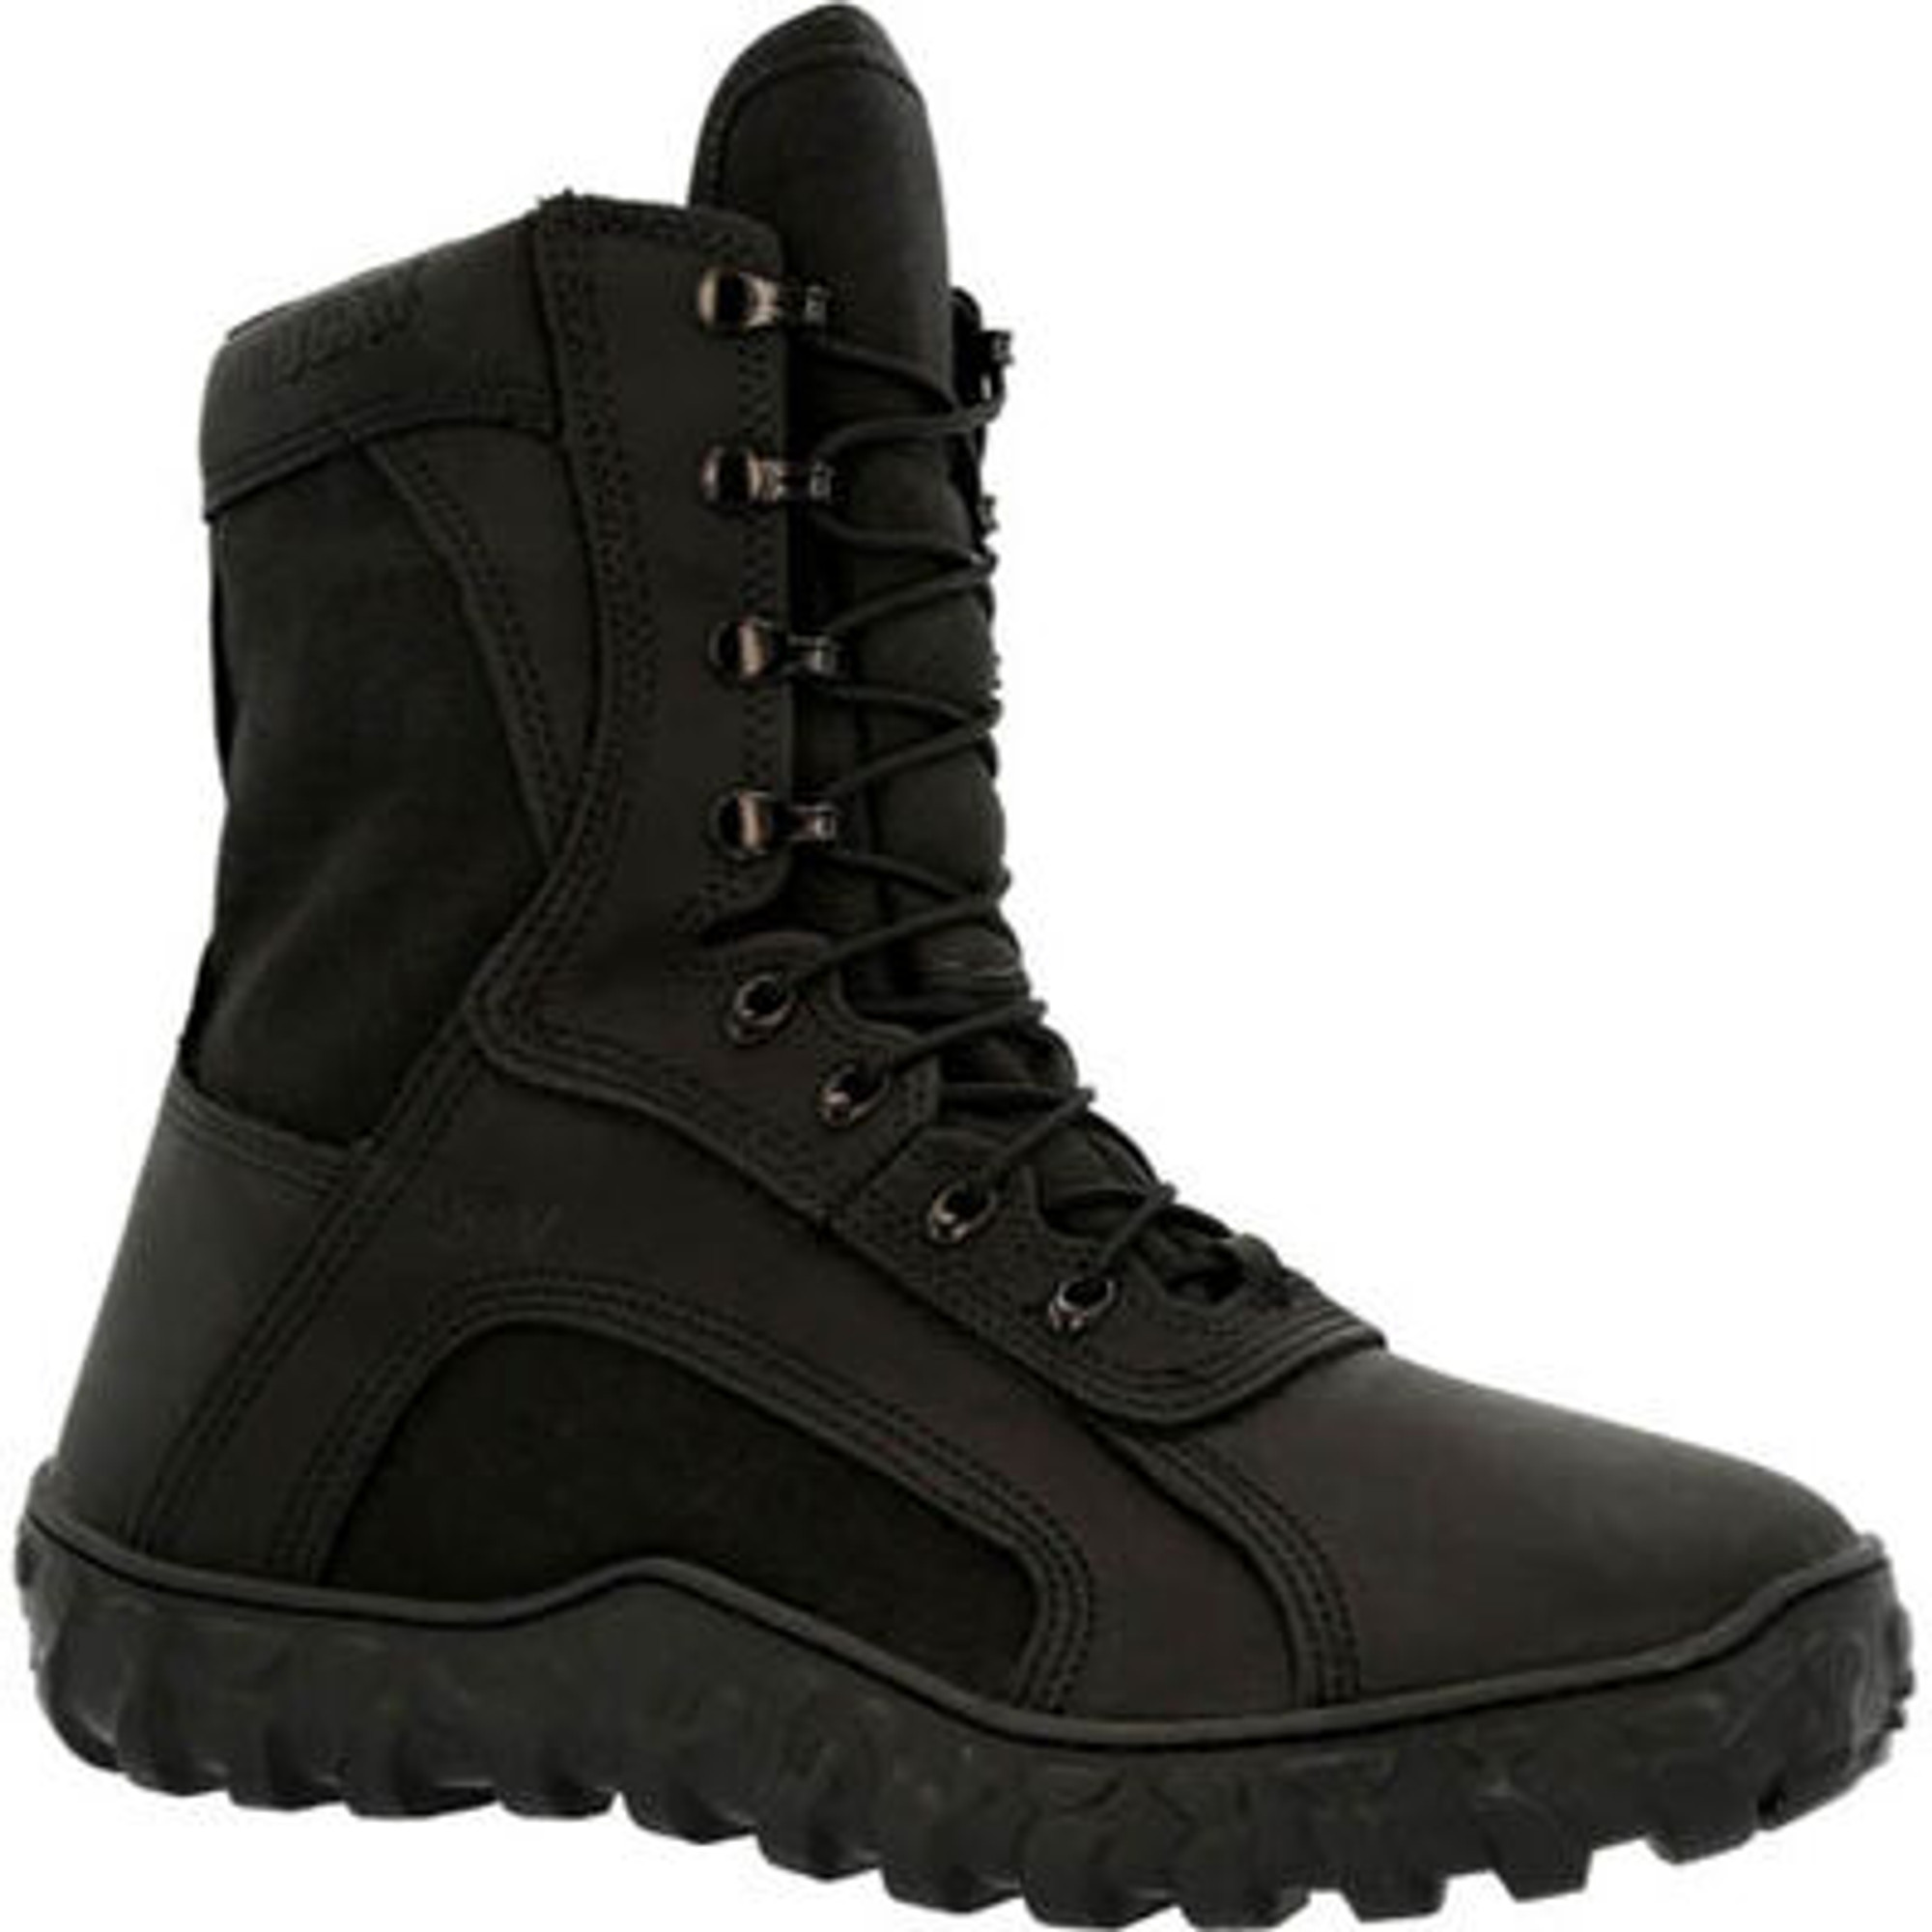 Rocky S2v 600g Insulated Waterproof Military Boot - Black